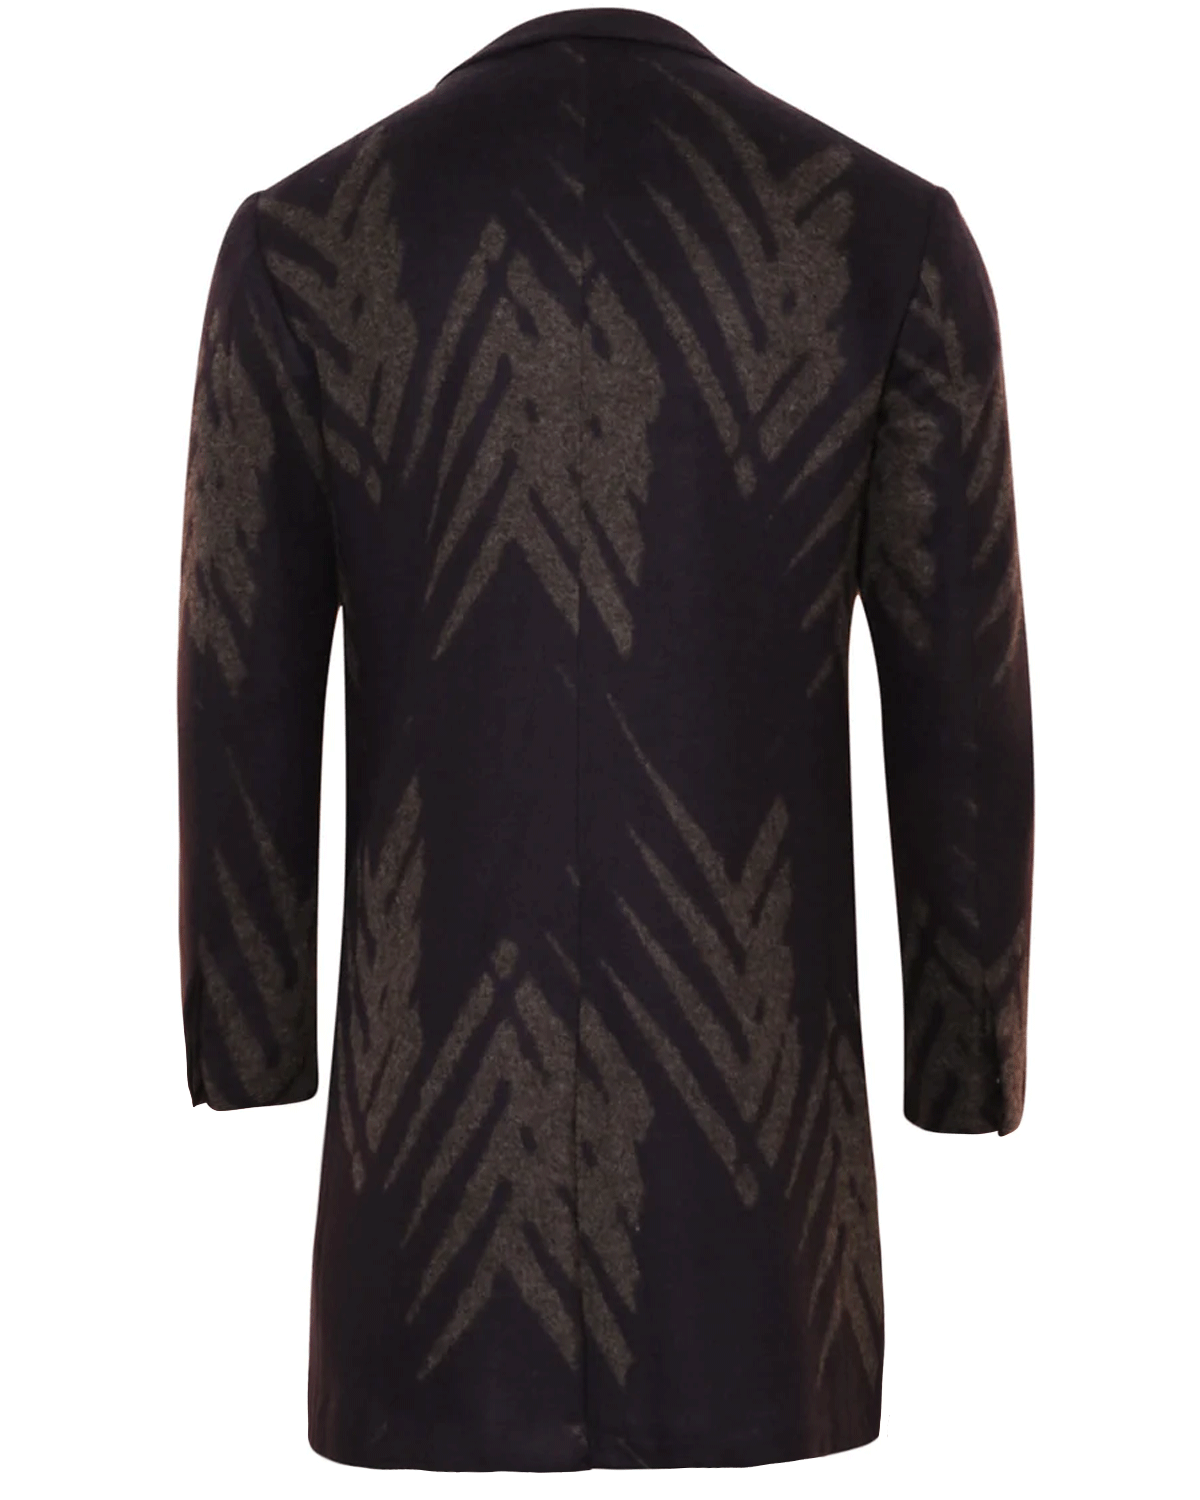 Navy and Grey Palm Print Cashmere Blend Overcoat